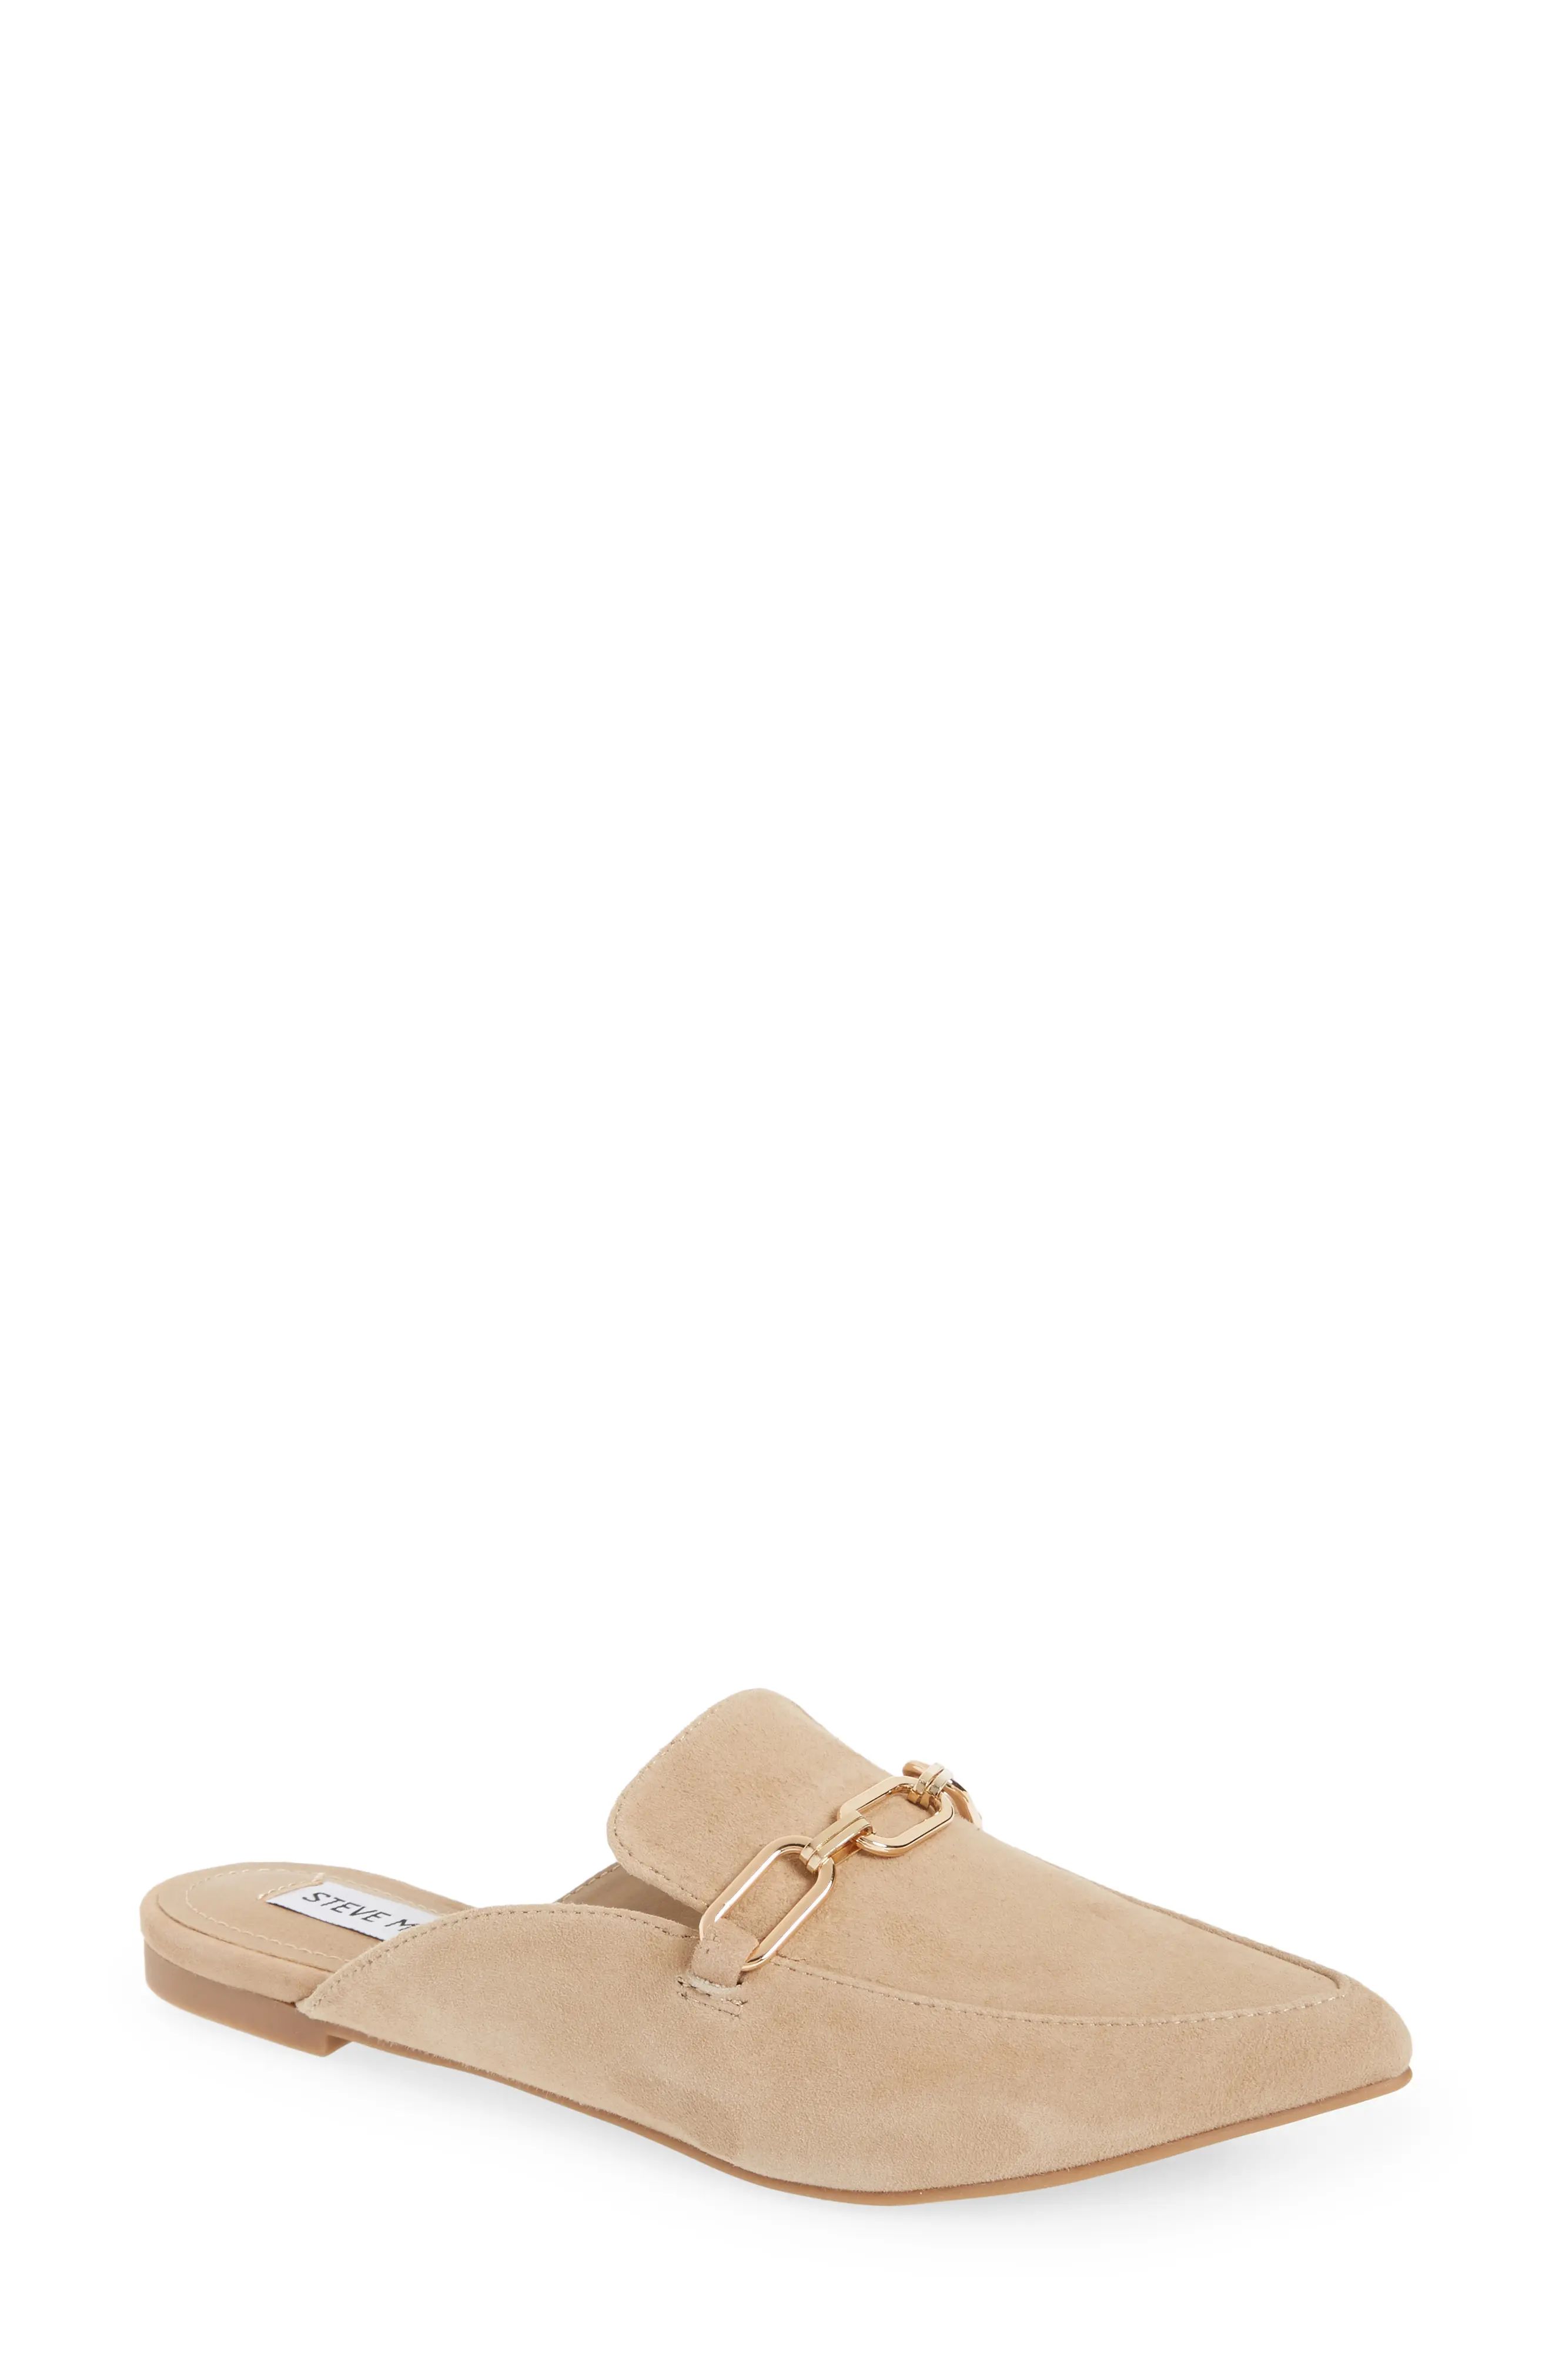 Steve Madden Faraway Chain Mule, Size 6 in Tan Suede at Nordstrom | Nordstrom